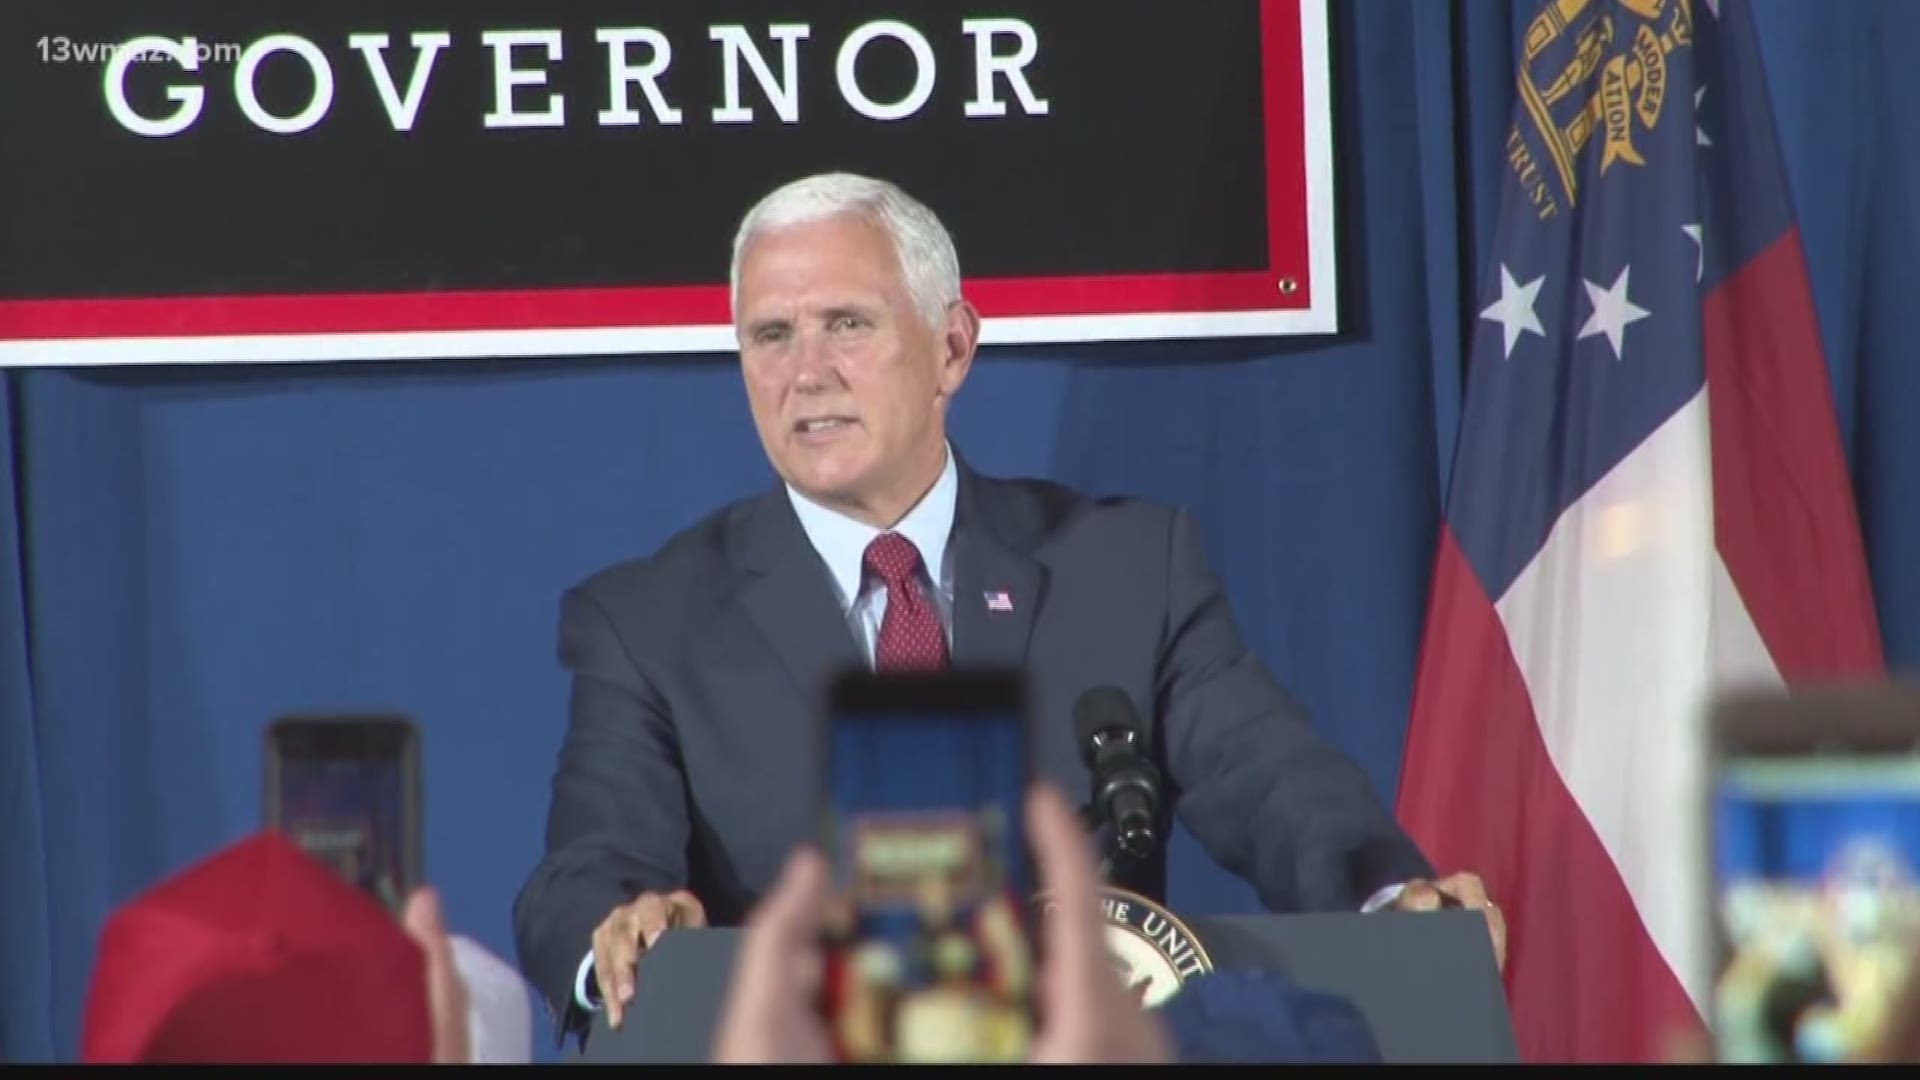 VP Pence stumps for Kemp at campaign rally in Macon